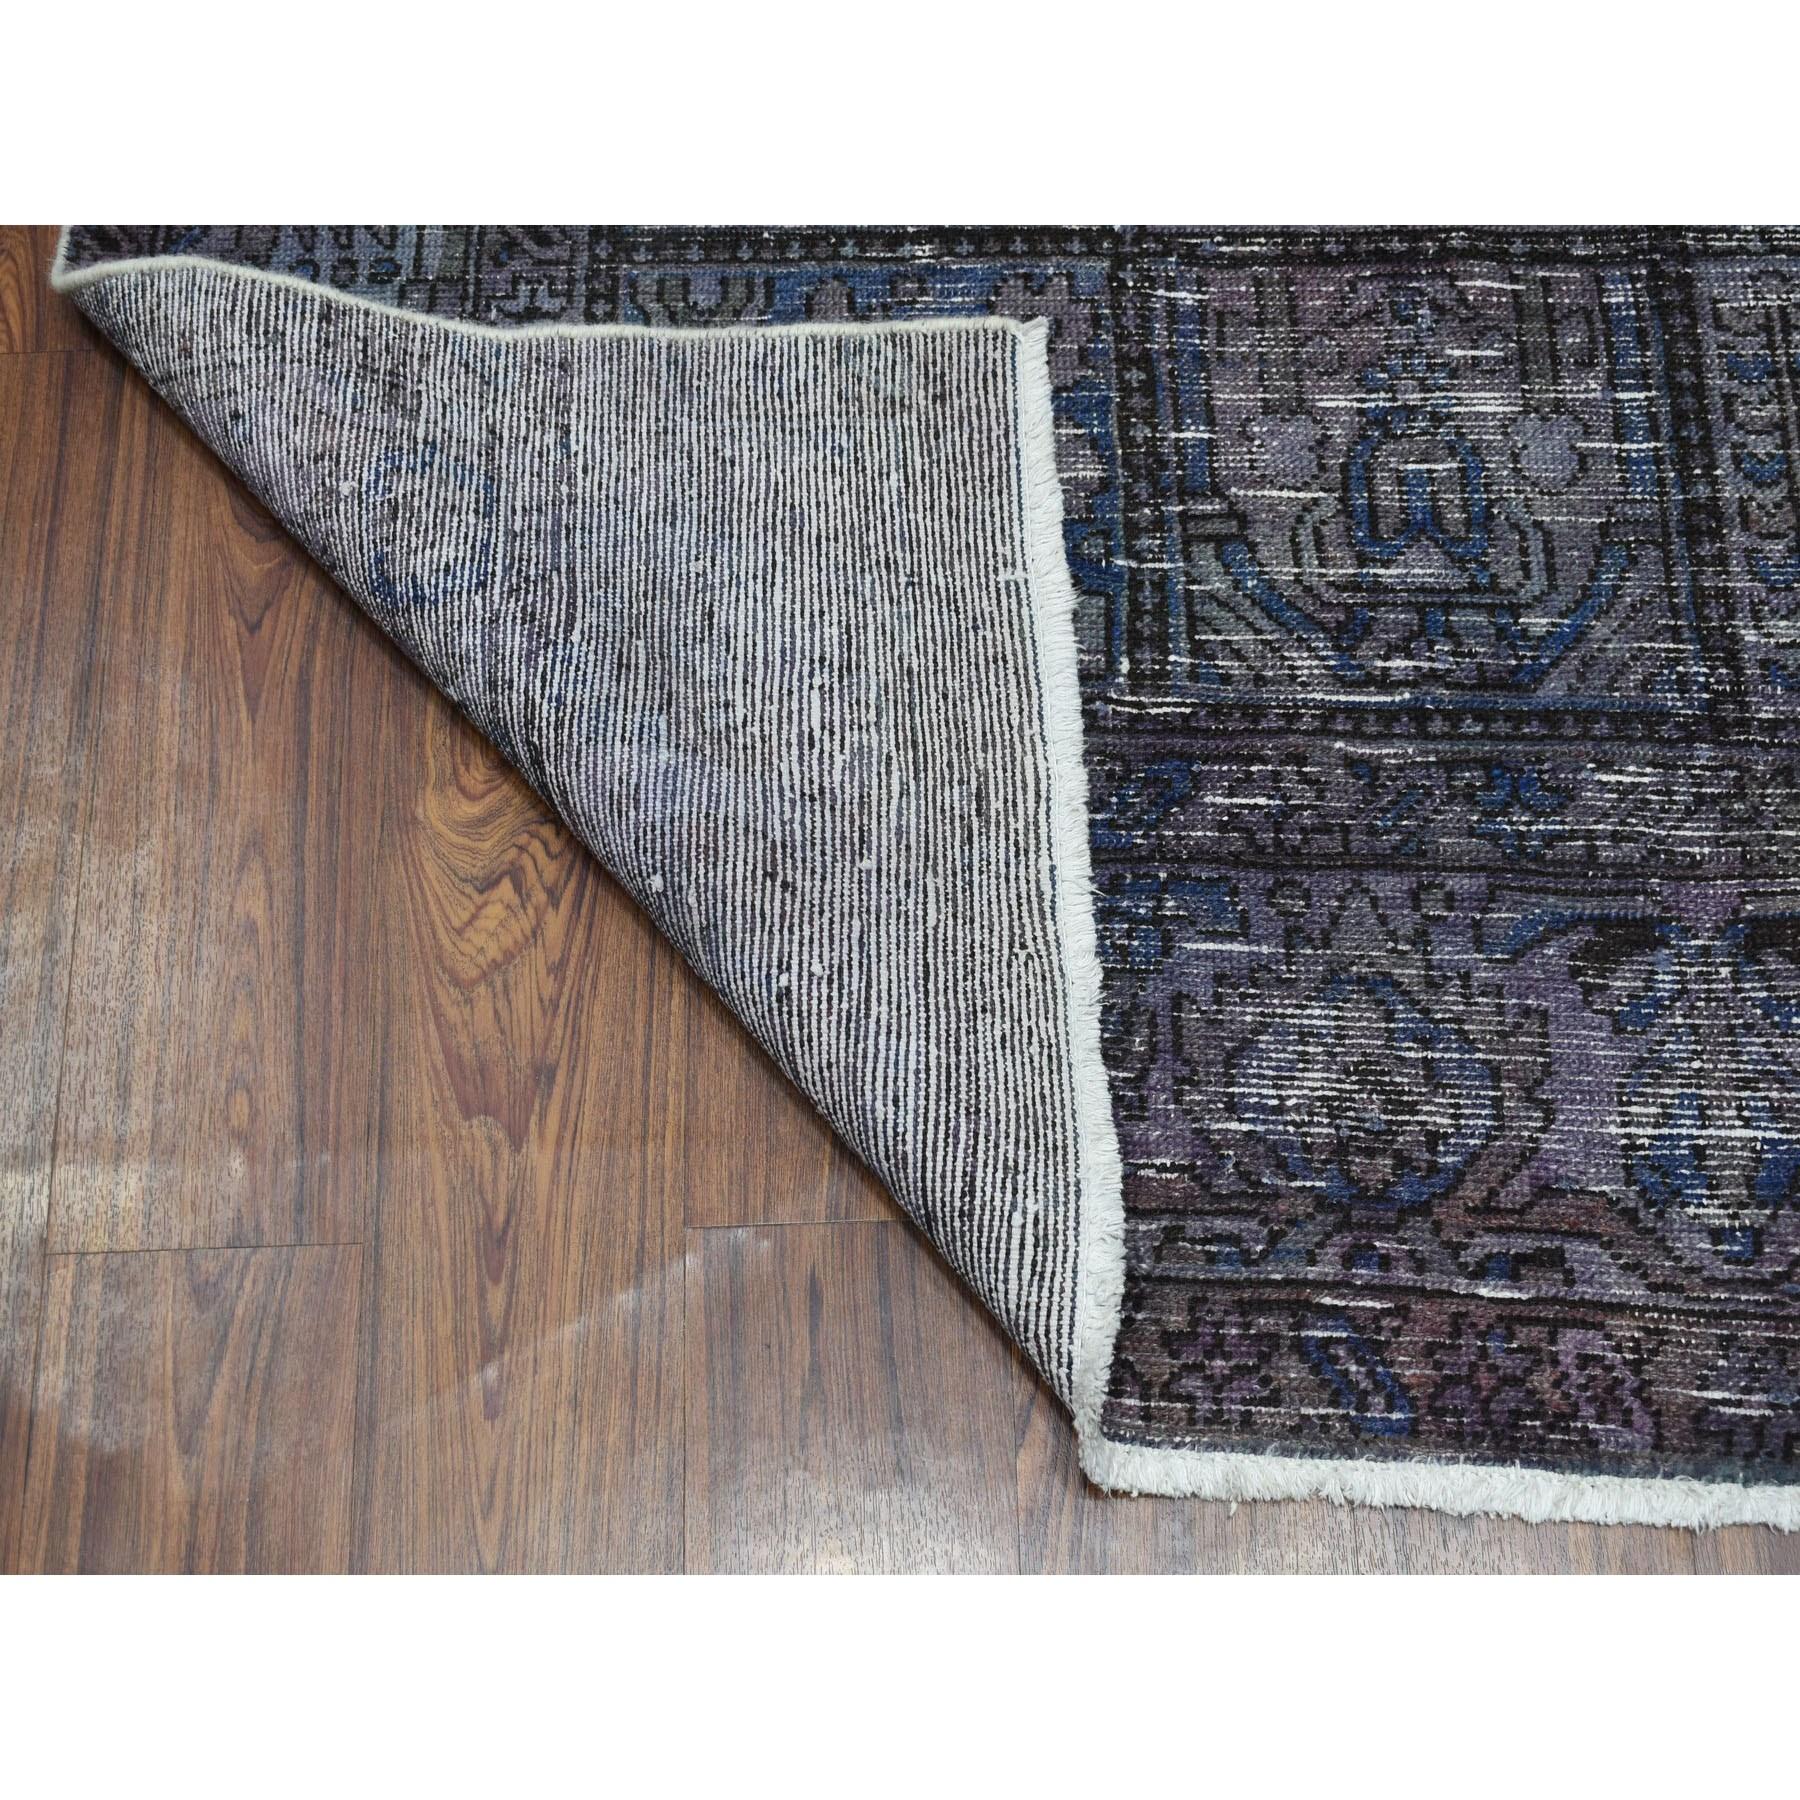 Medieval Vintage And Worn Down Distressed Colors Persian Shiraz Hand Knotted Bohemian Rug For Sale